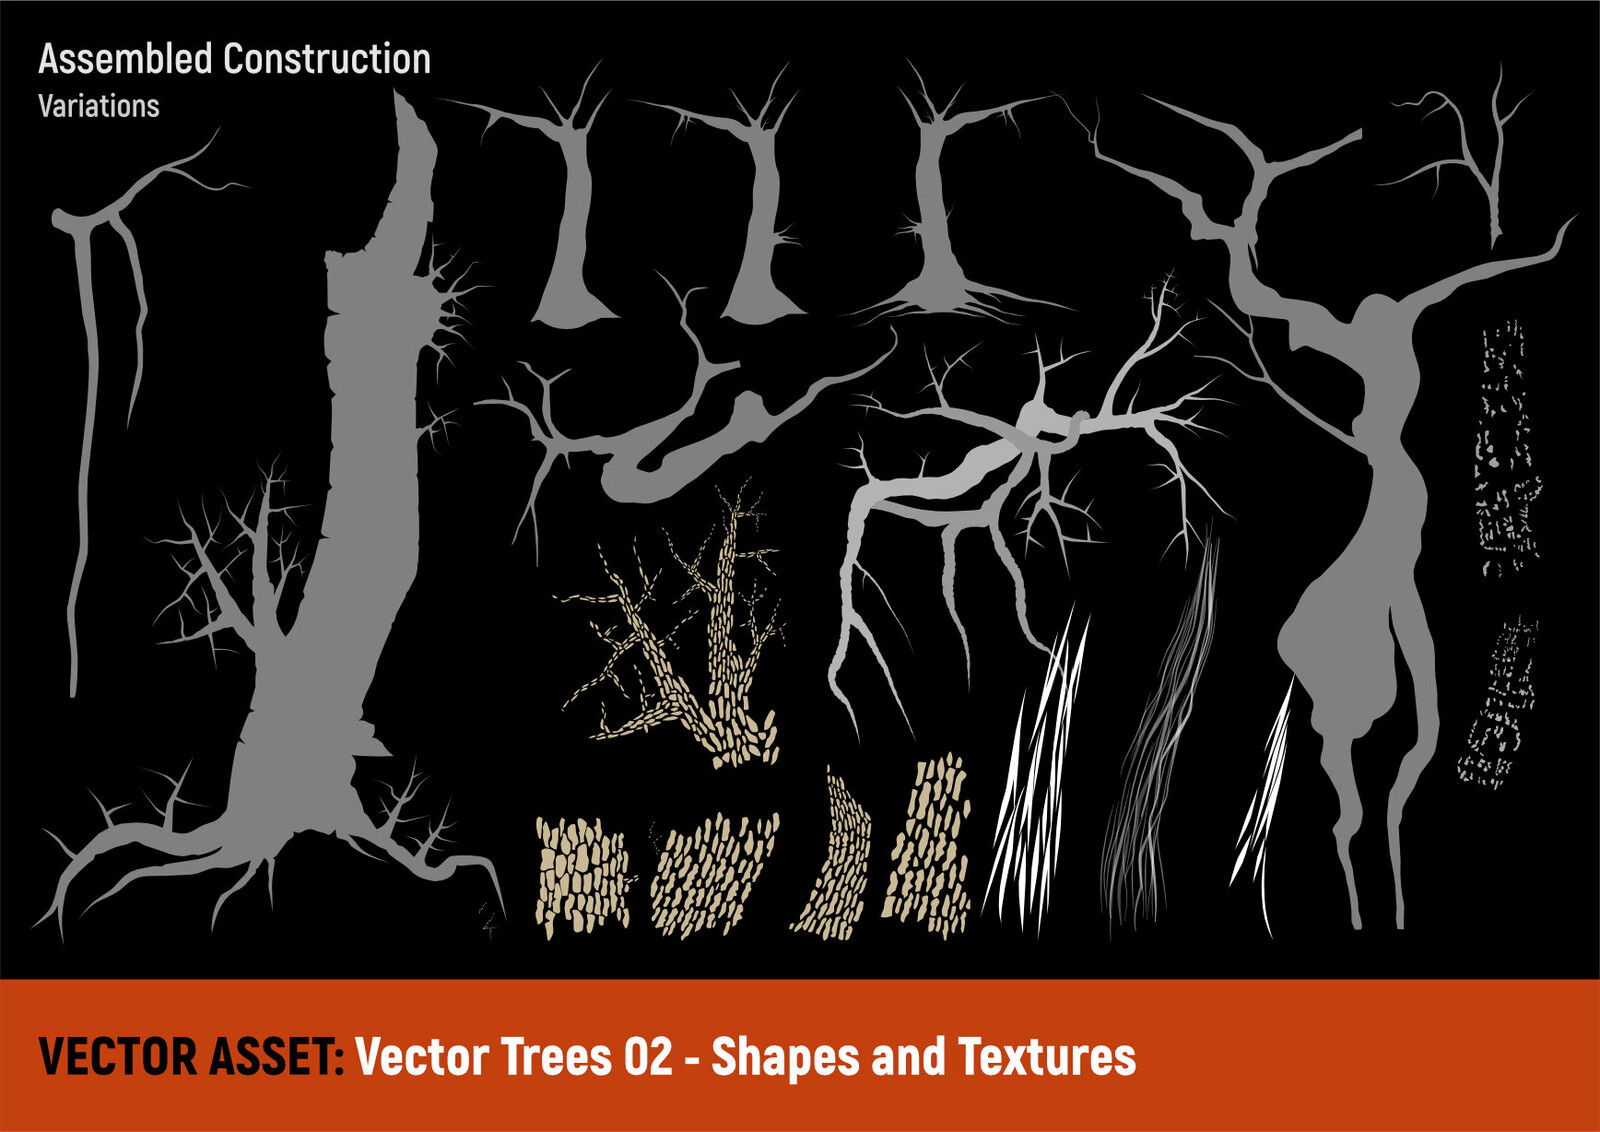 Vector Shapes
